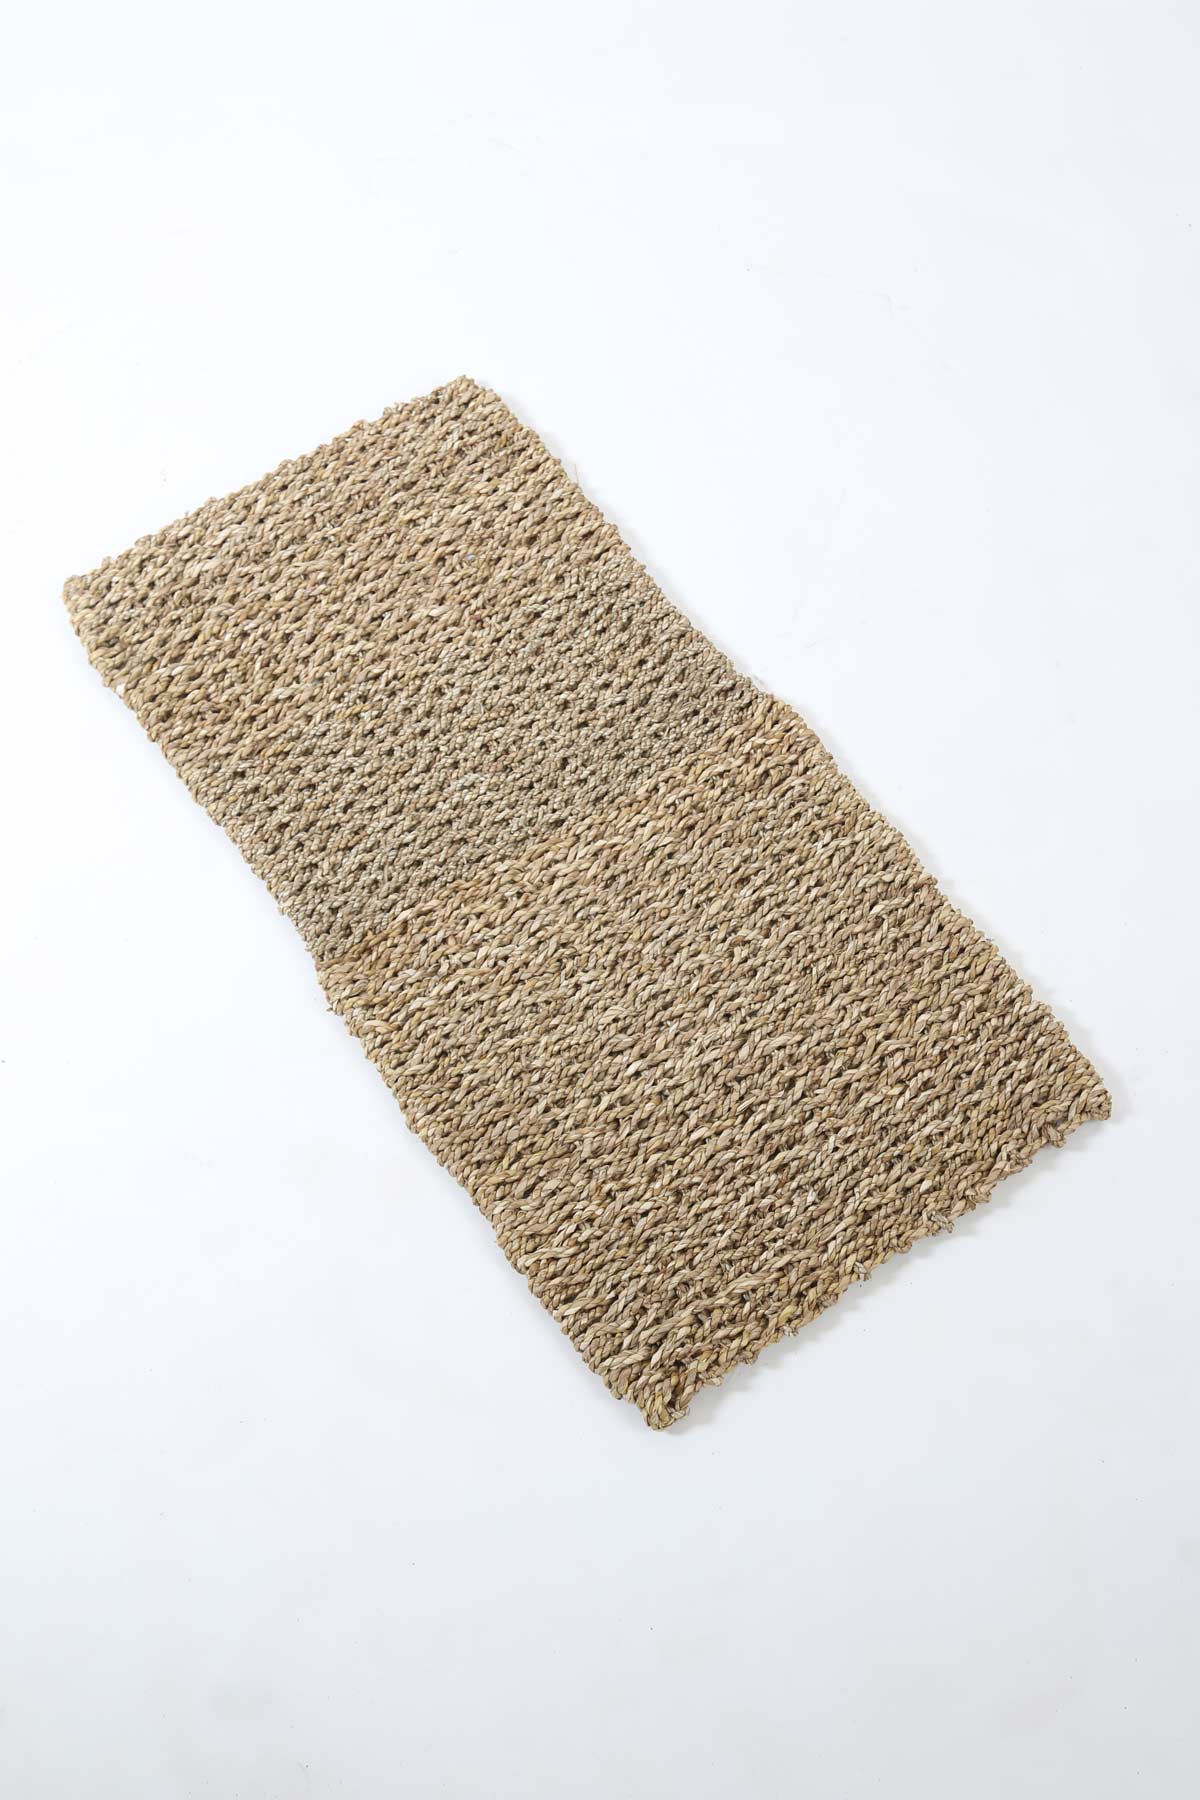 Hand Woven Seagrass Doormat in Natural